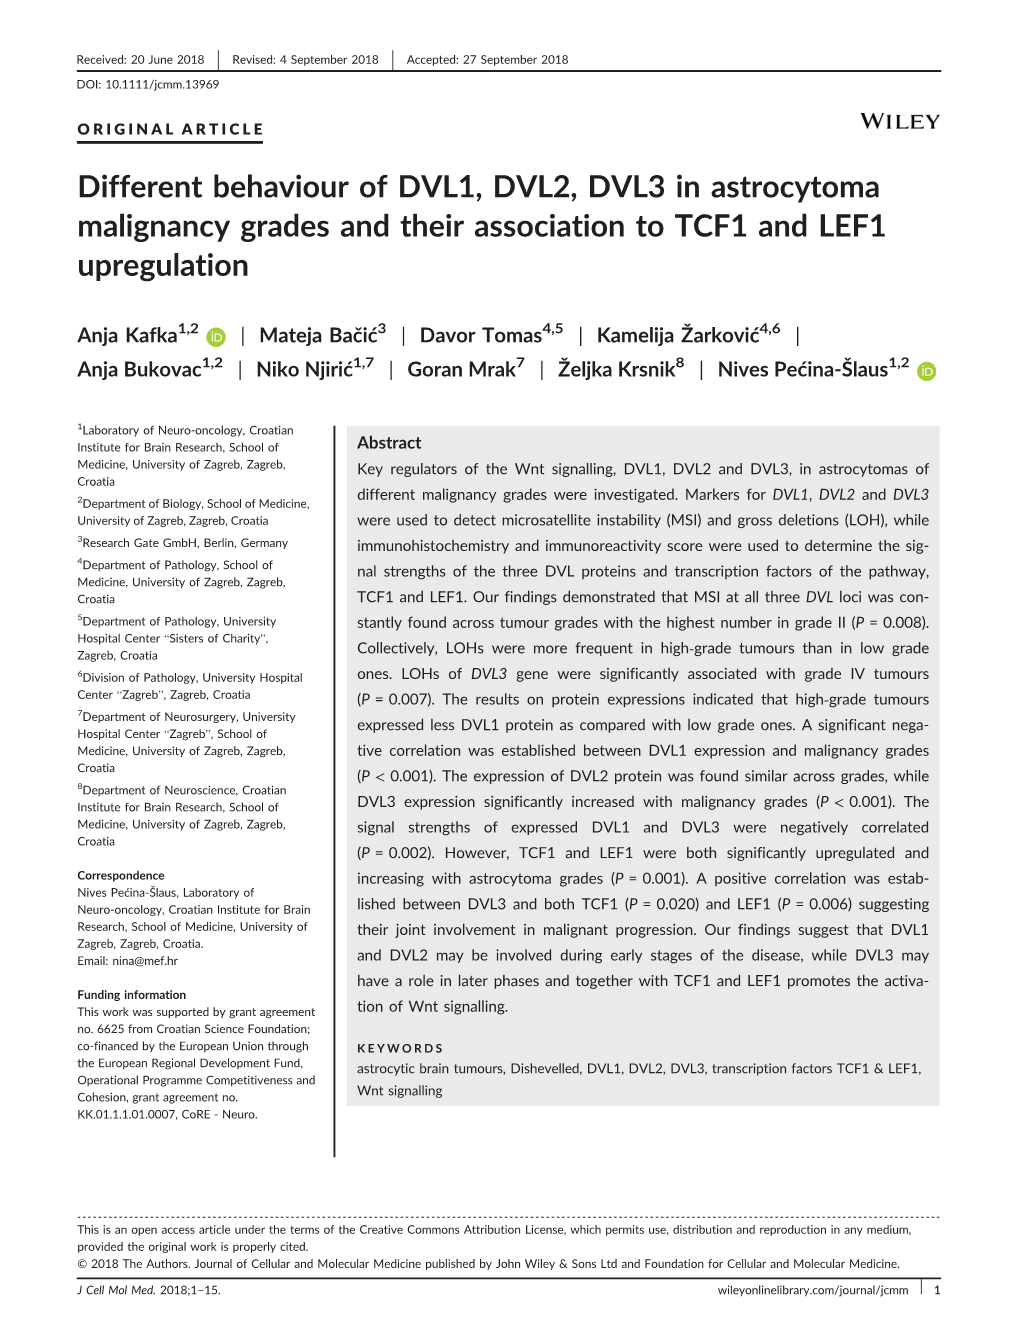 Different Behaviour of DVL1, DVL2, DVL3 in Astrocytoma Malignancy Grades and Their Association to TCF1 and LEF1 Upregulation